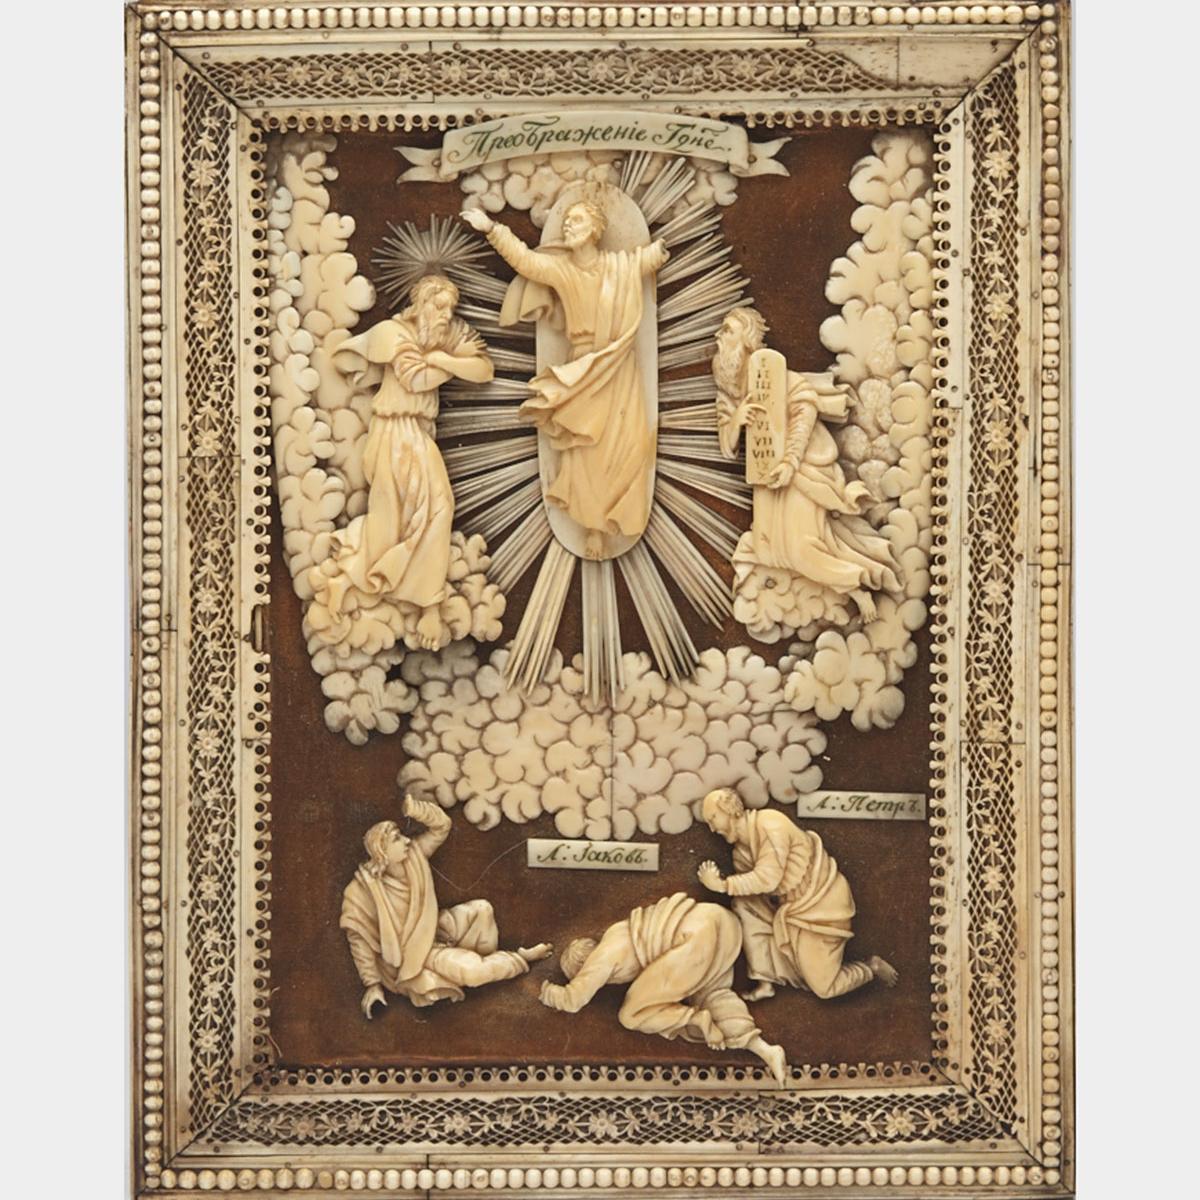 Russian Carved and Pierced Bone Icon of Christ’s Ascension, Kholmogory, early 19th century